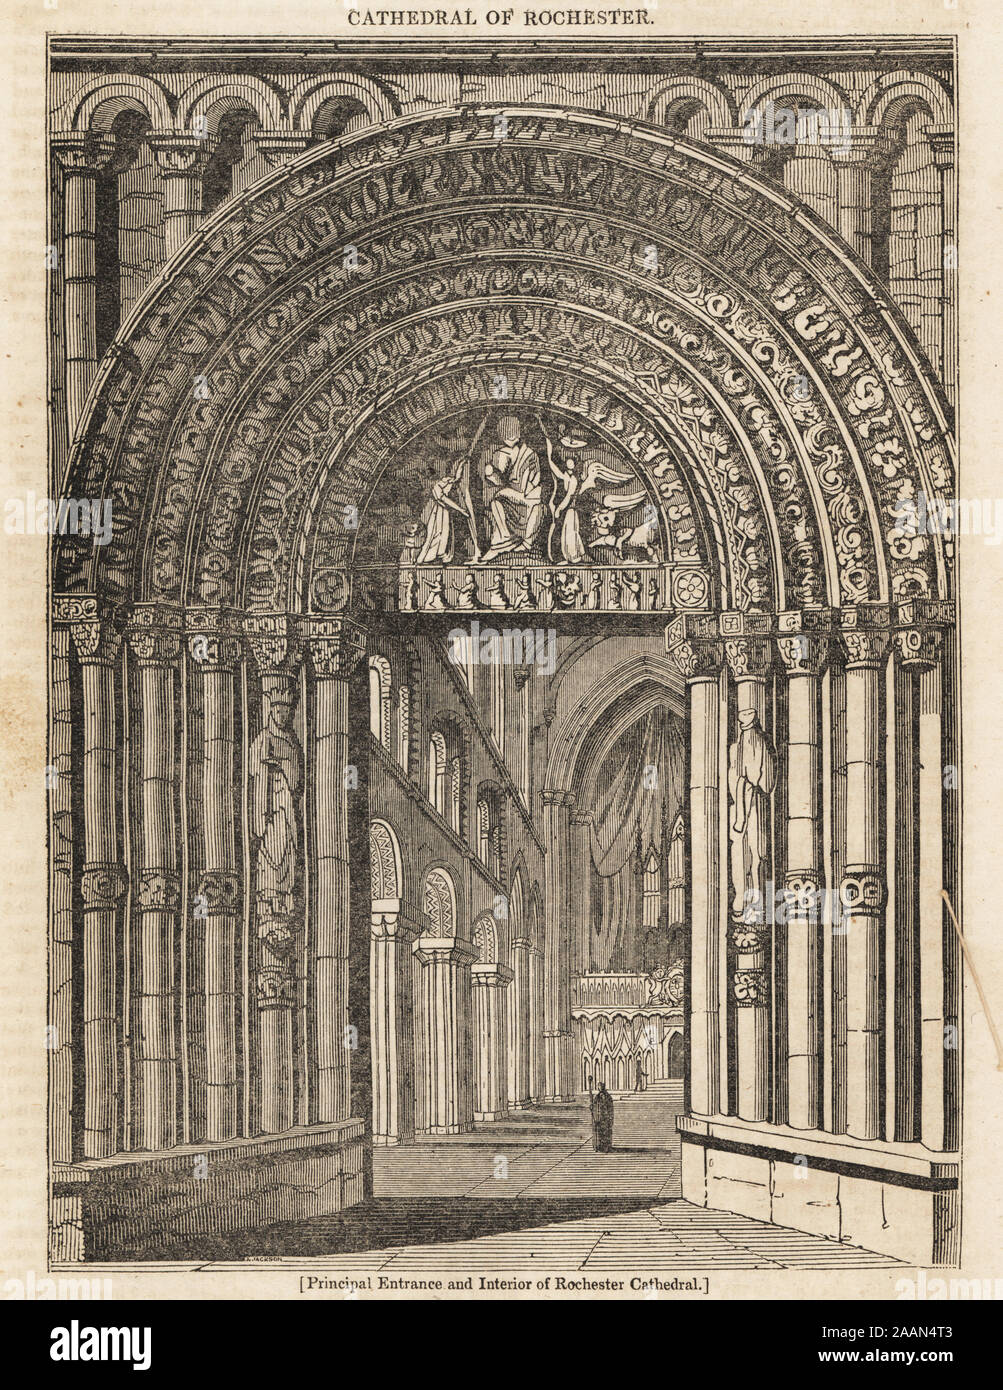 Principal entrance and interior of Rochester Cathedral, Kent. Stonework of the Great West Door, unaltered since the time of Ernulf, 12th century. Woodblock engraving from The Penny Magazine, of the Society for the Diffusion of Useful Knowledge, printed by William Clowes, Lambeth, 1833. Stock Photo